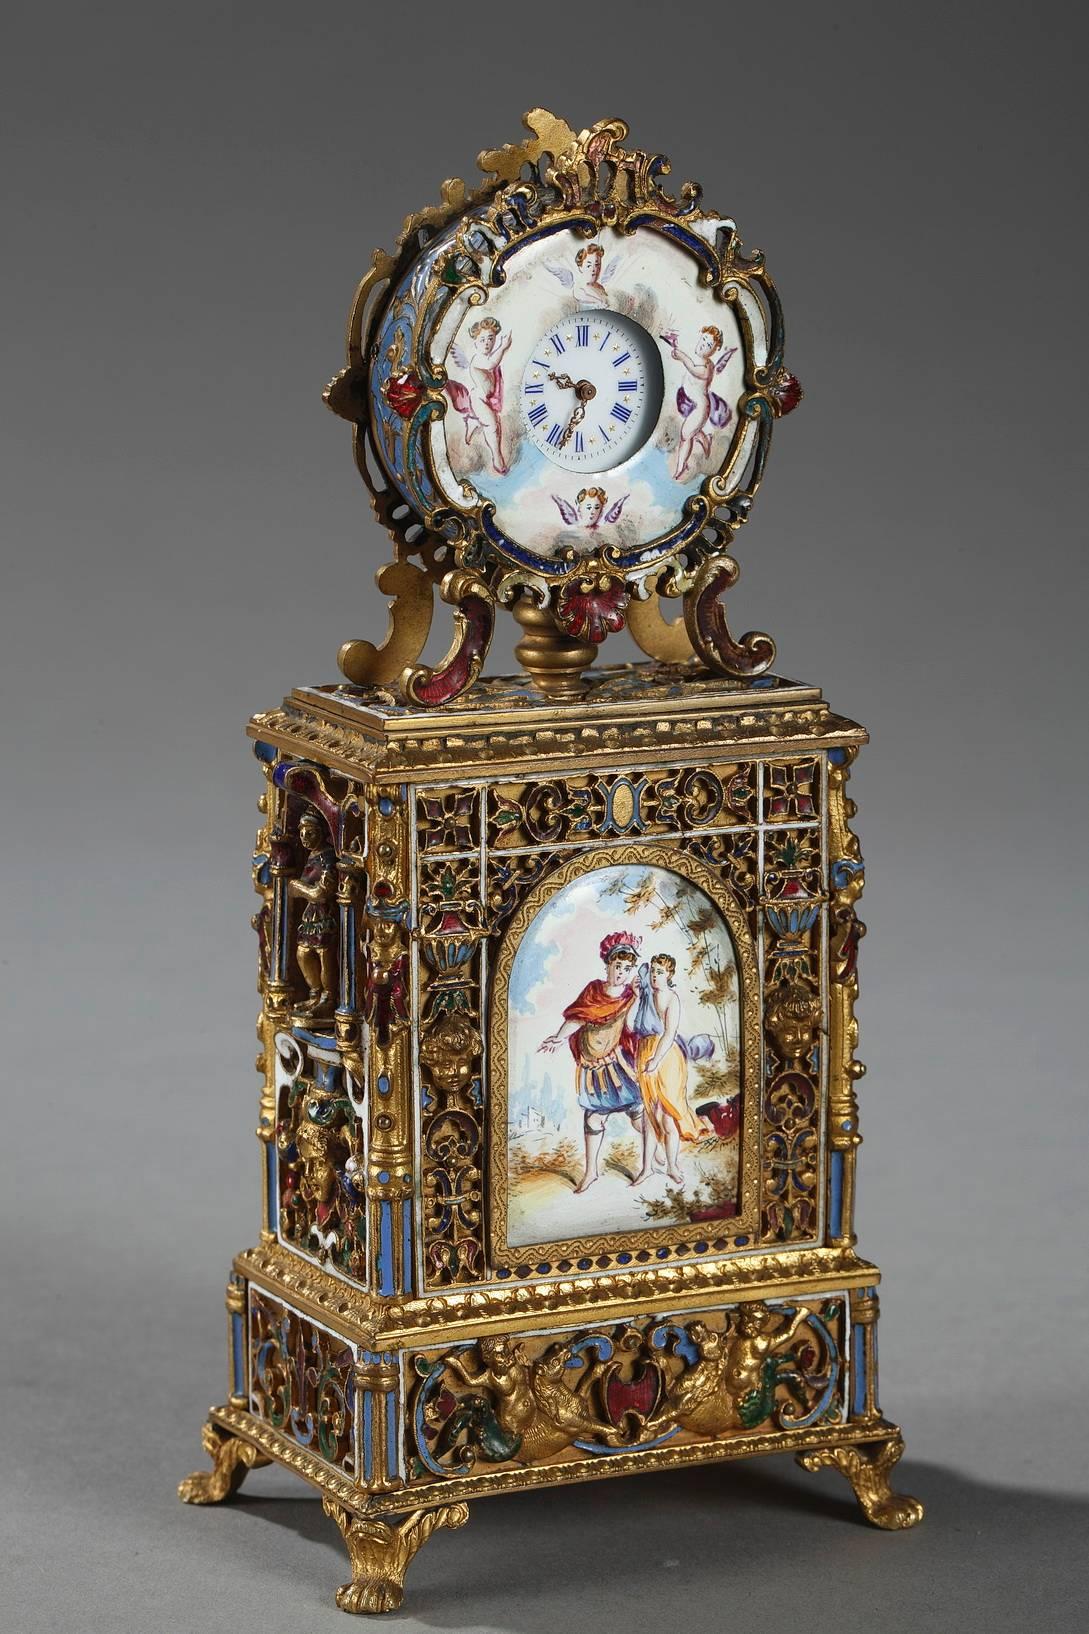 Small table clock in gilt brass richly decorated with openwork scrollwork, acanthus leaves, flowers, and masks in multicolored enamel. The main faces of the base are ornamented with two enamel plates that represent mythological scenes. The side